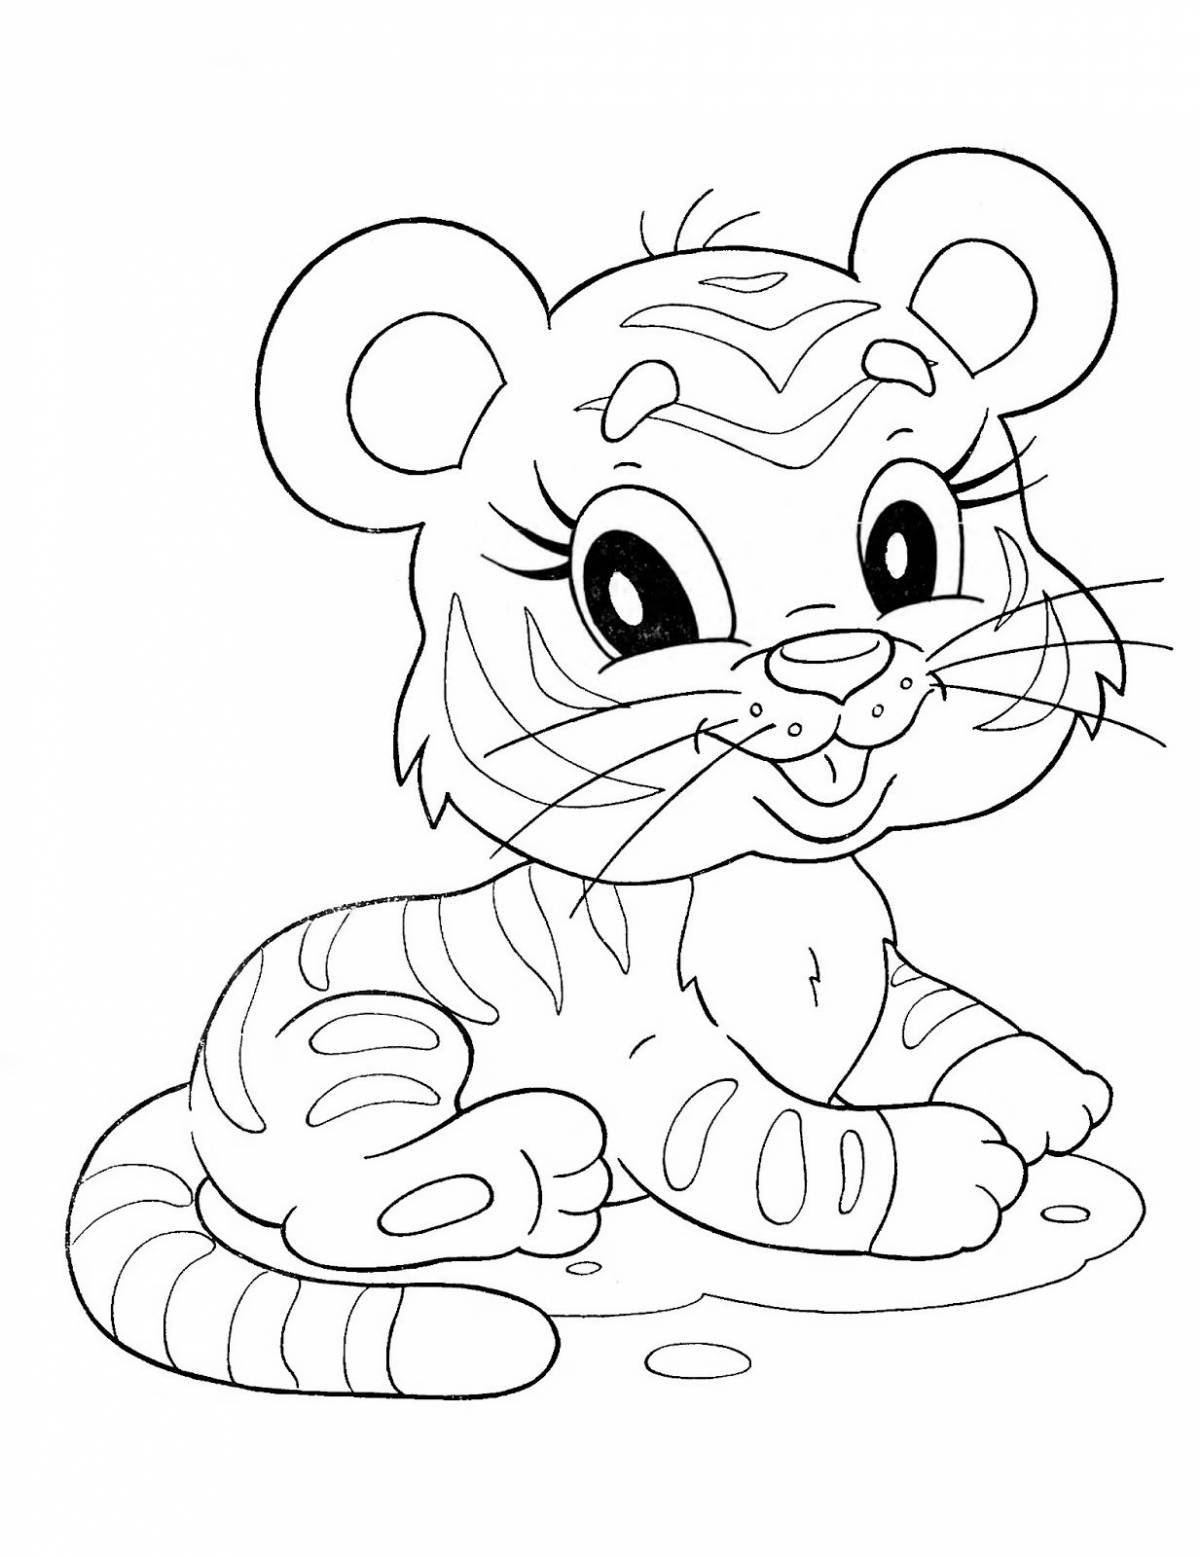 Humorous tiger coloring book for kids